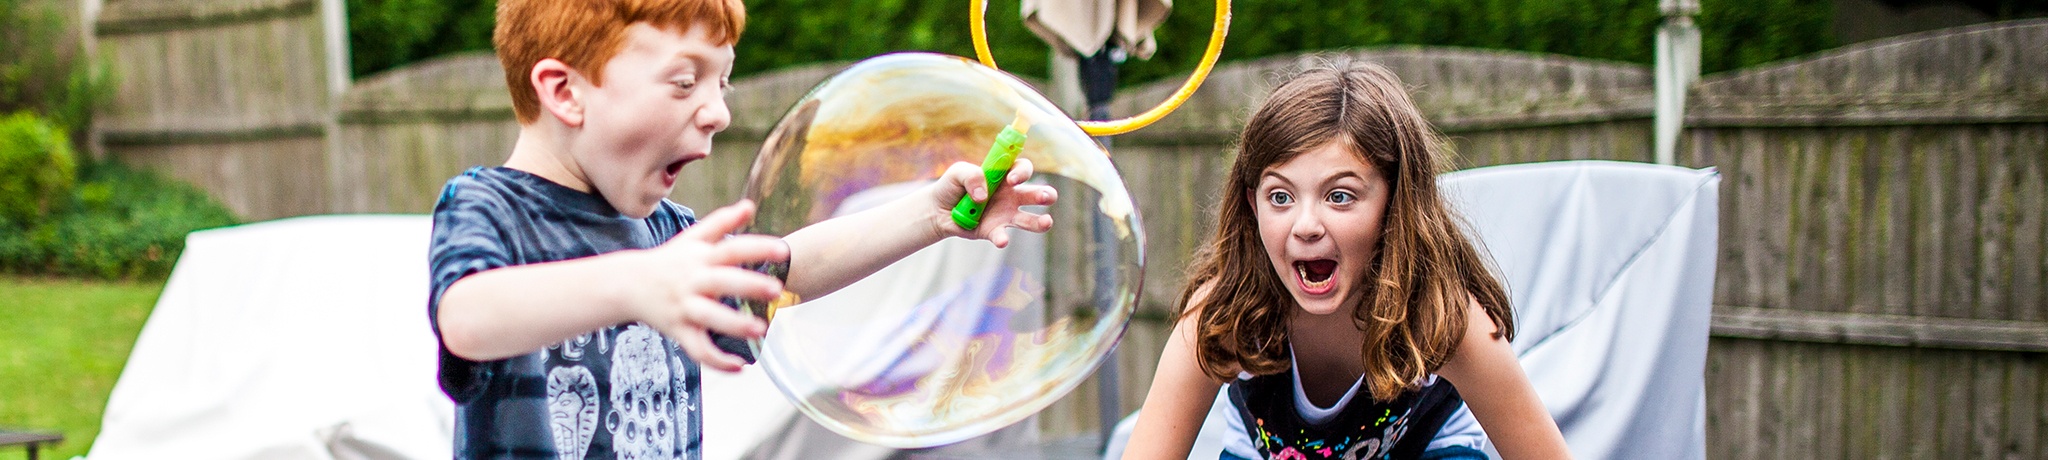 Two kids playing with large bubble